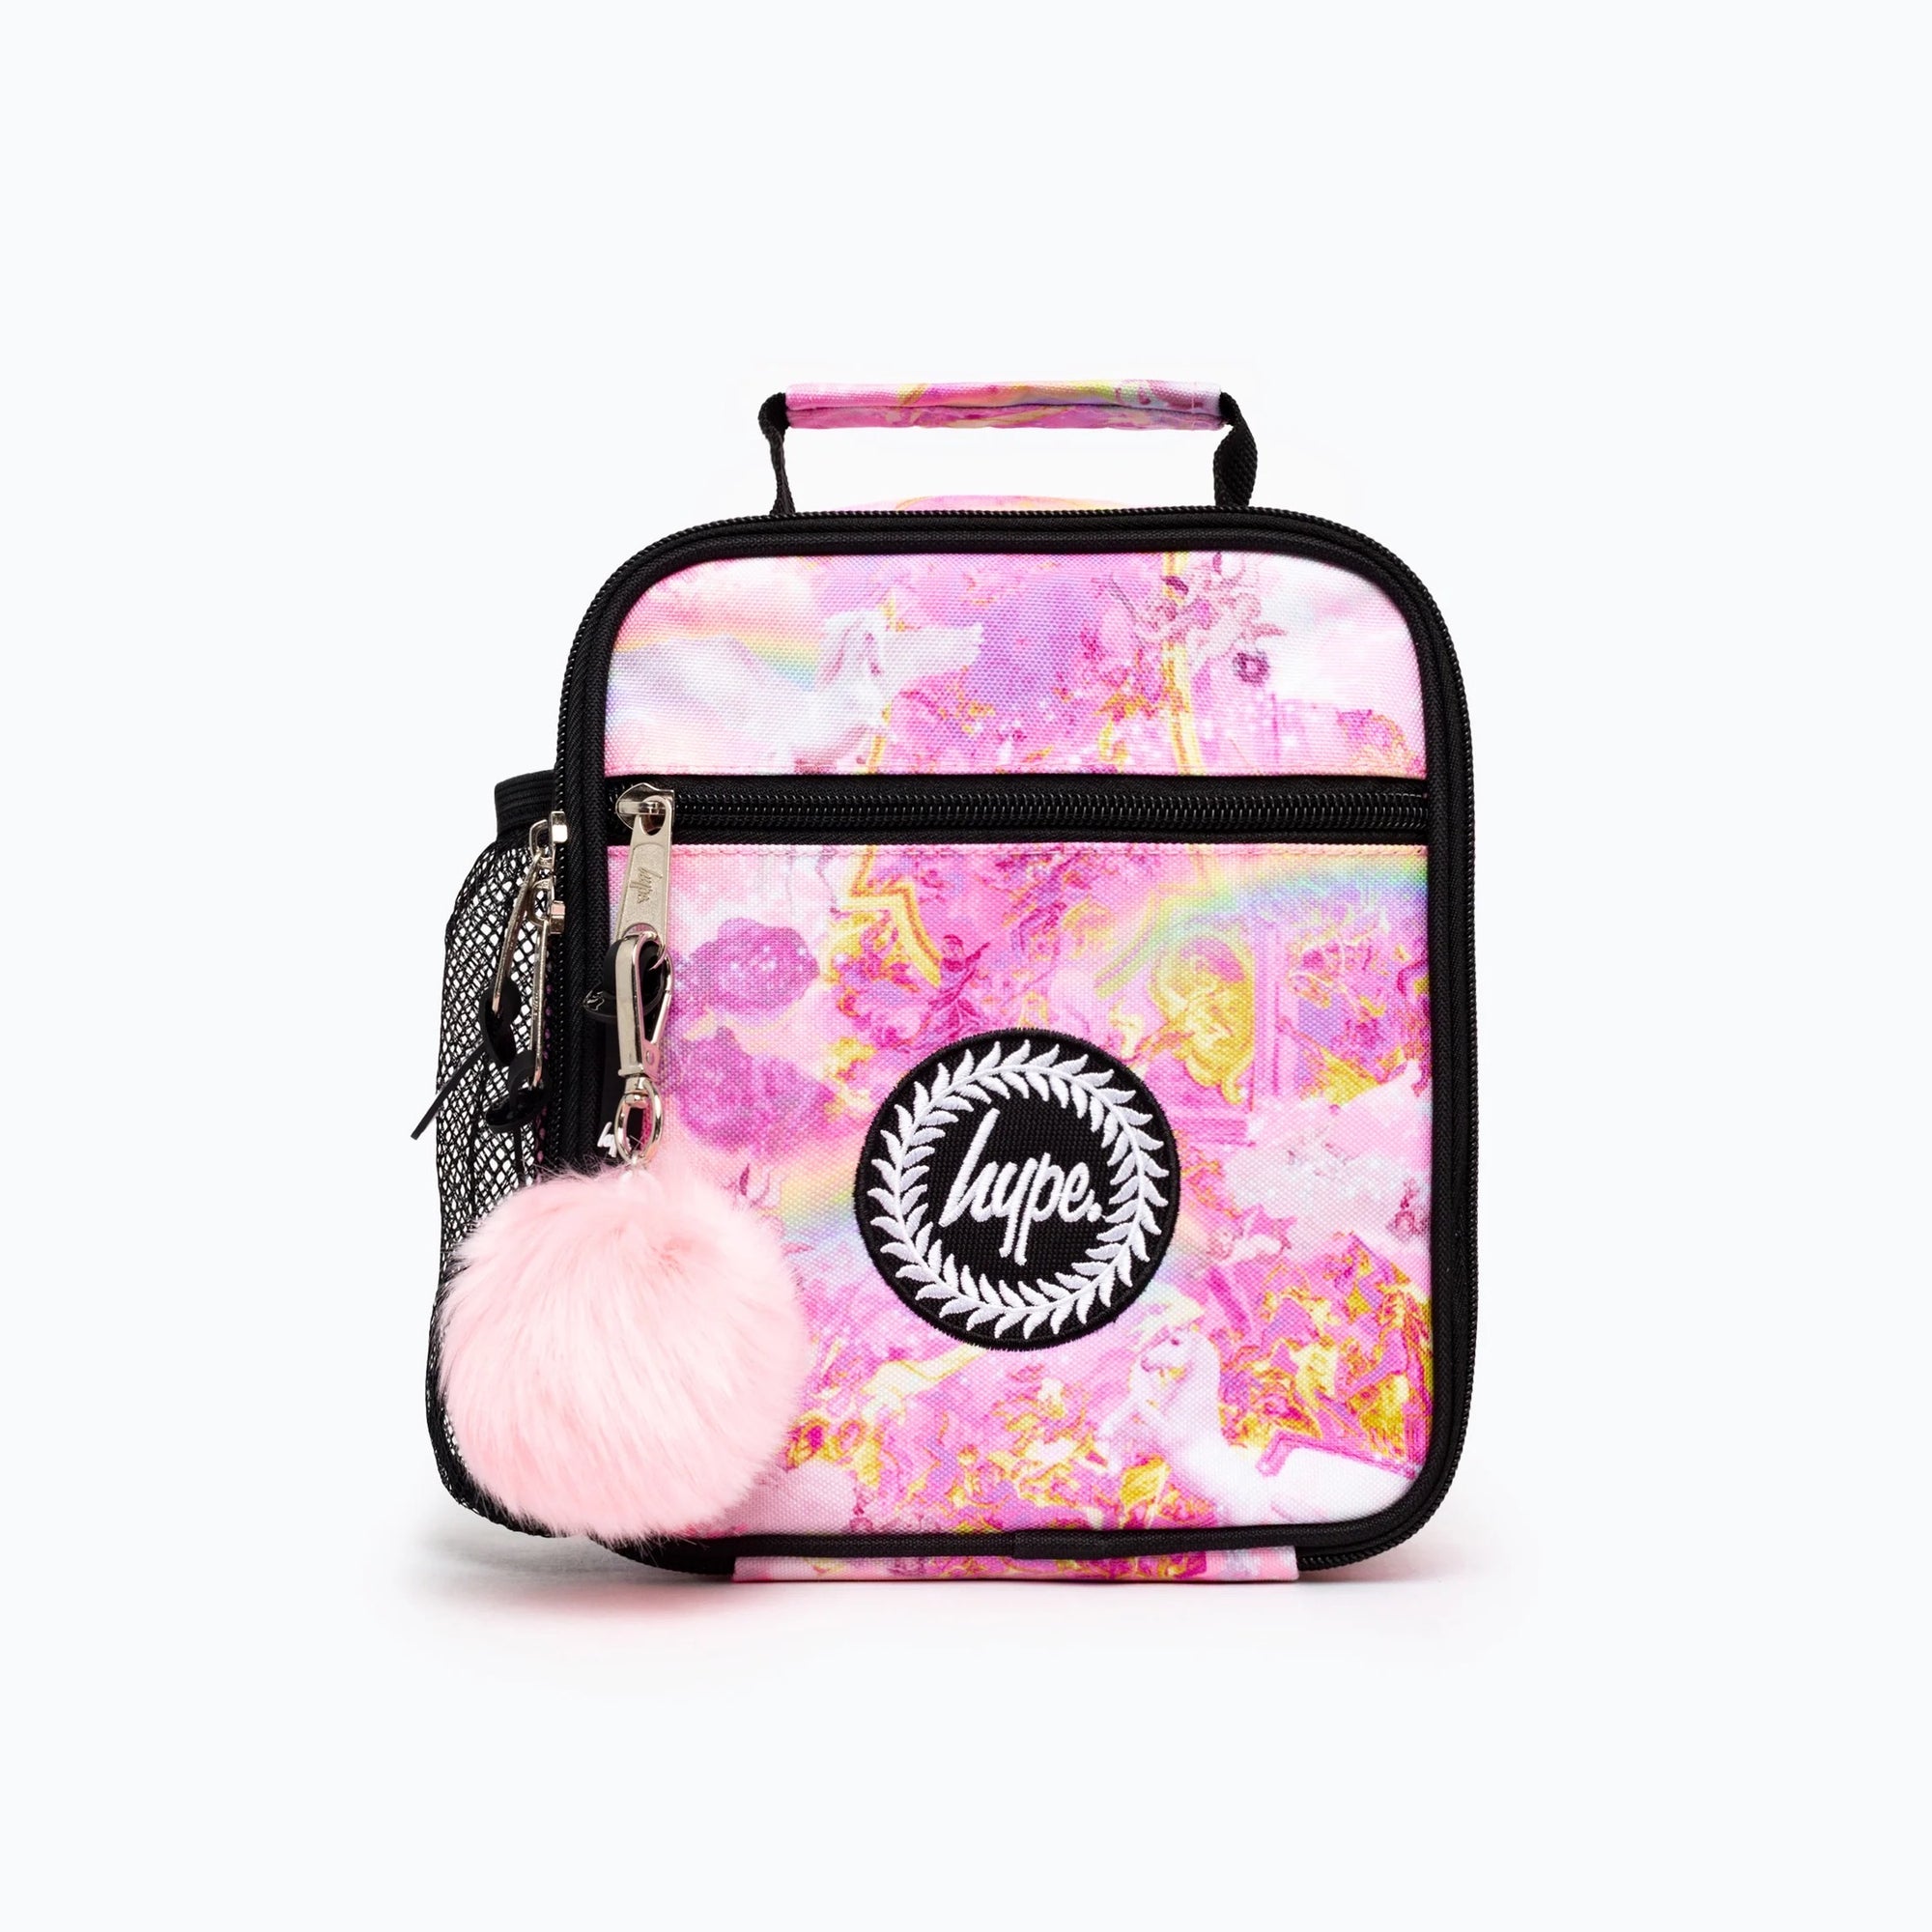 Hype Unicorn Rennaisance Lunch Bag Xucb-121 Accessories ONE SIZE / Pink